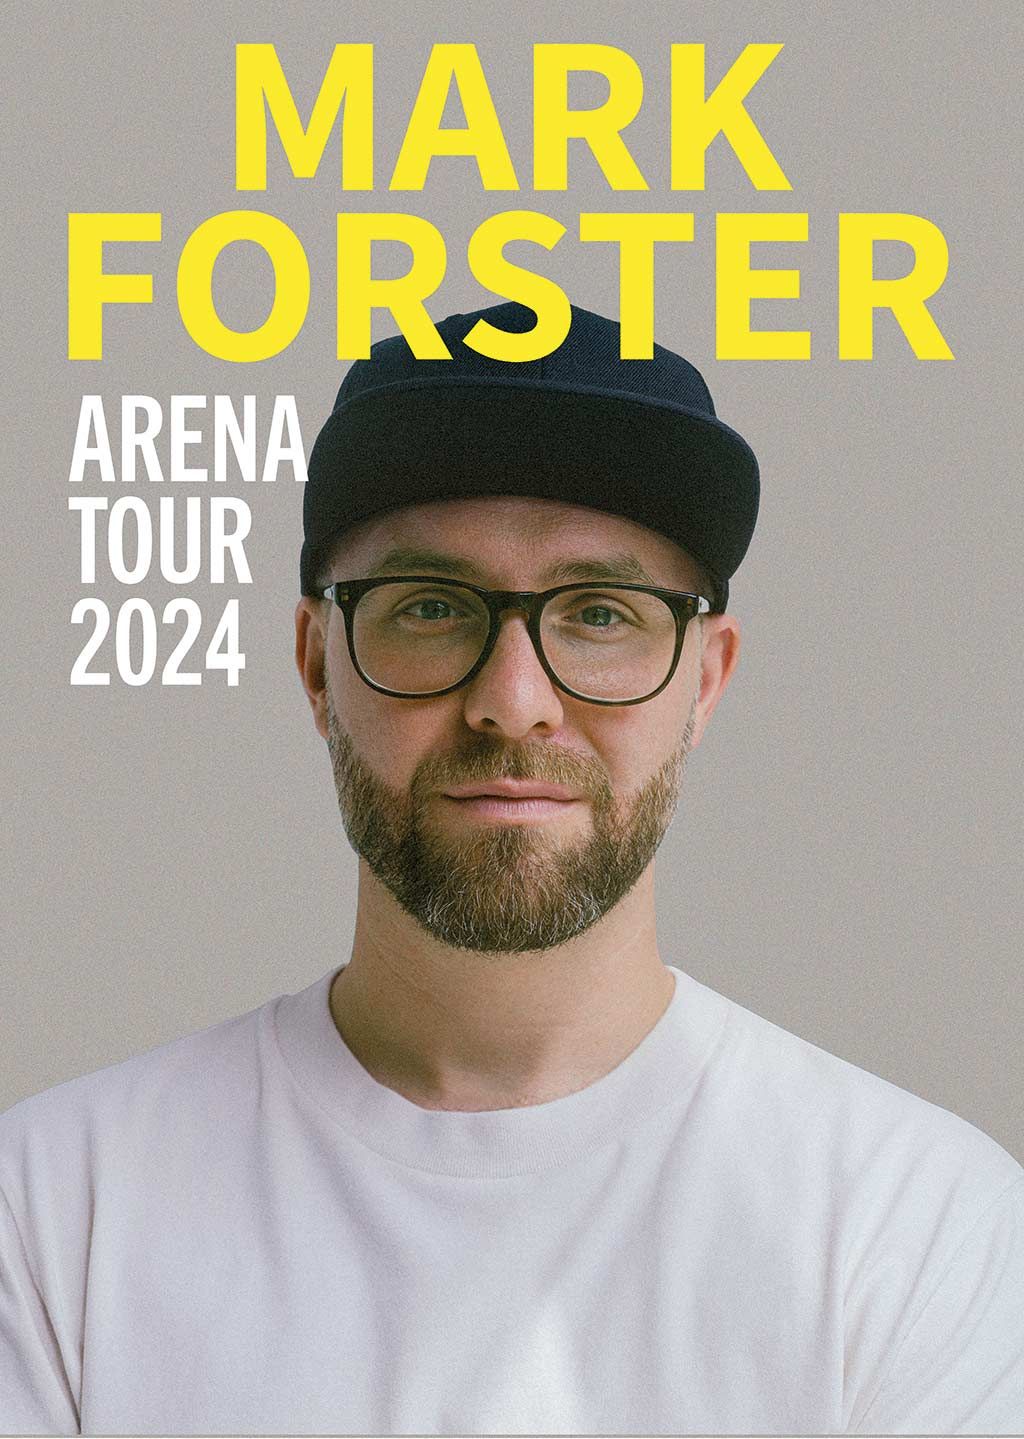 Mark Forster - Arena Tour 2024 at Messehalle Erfurt Tickets